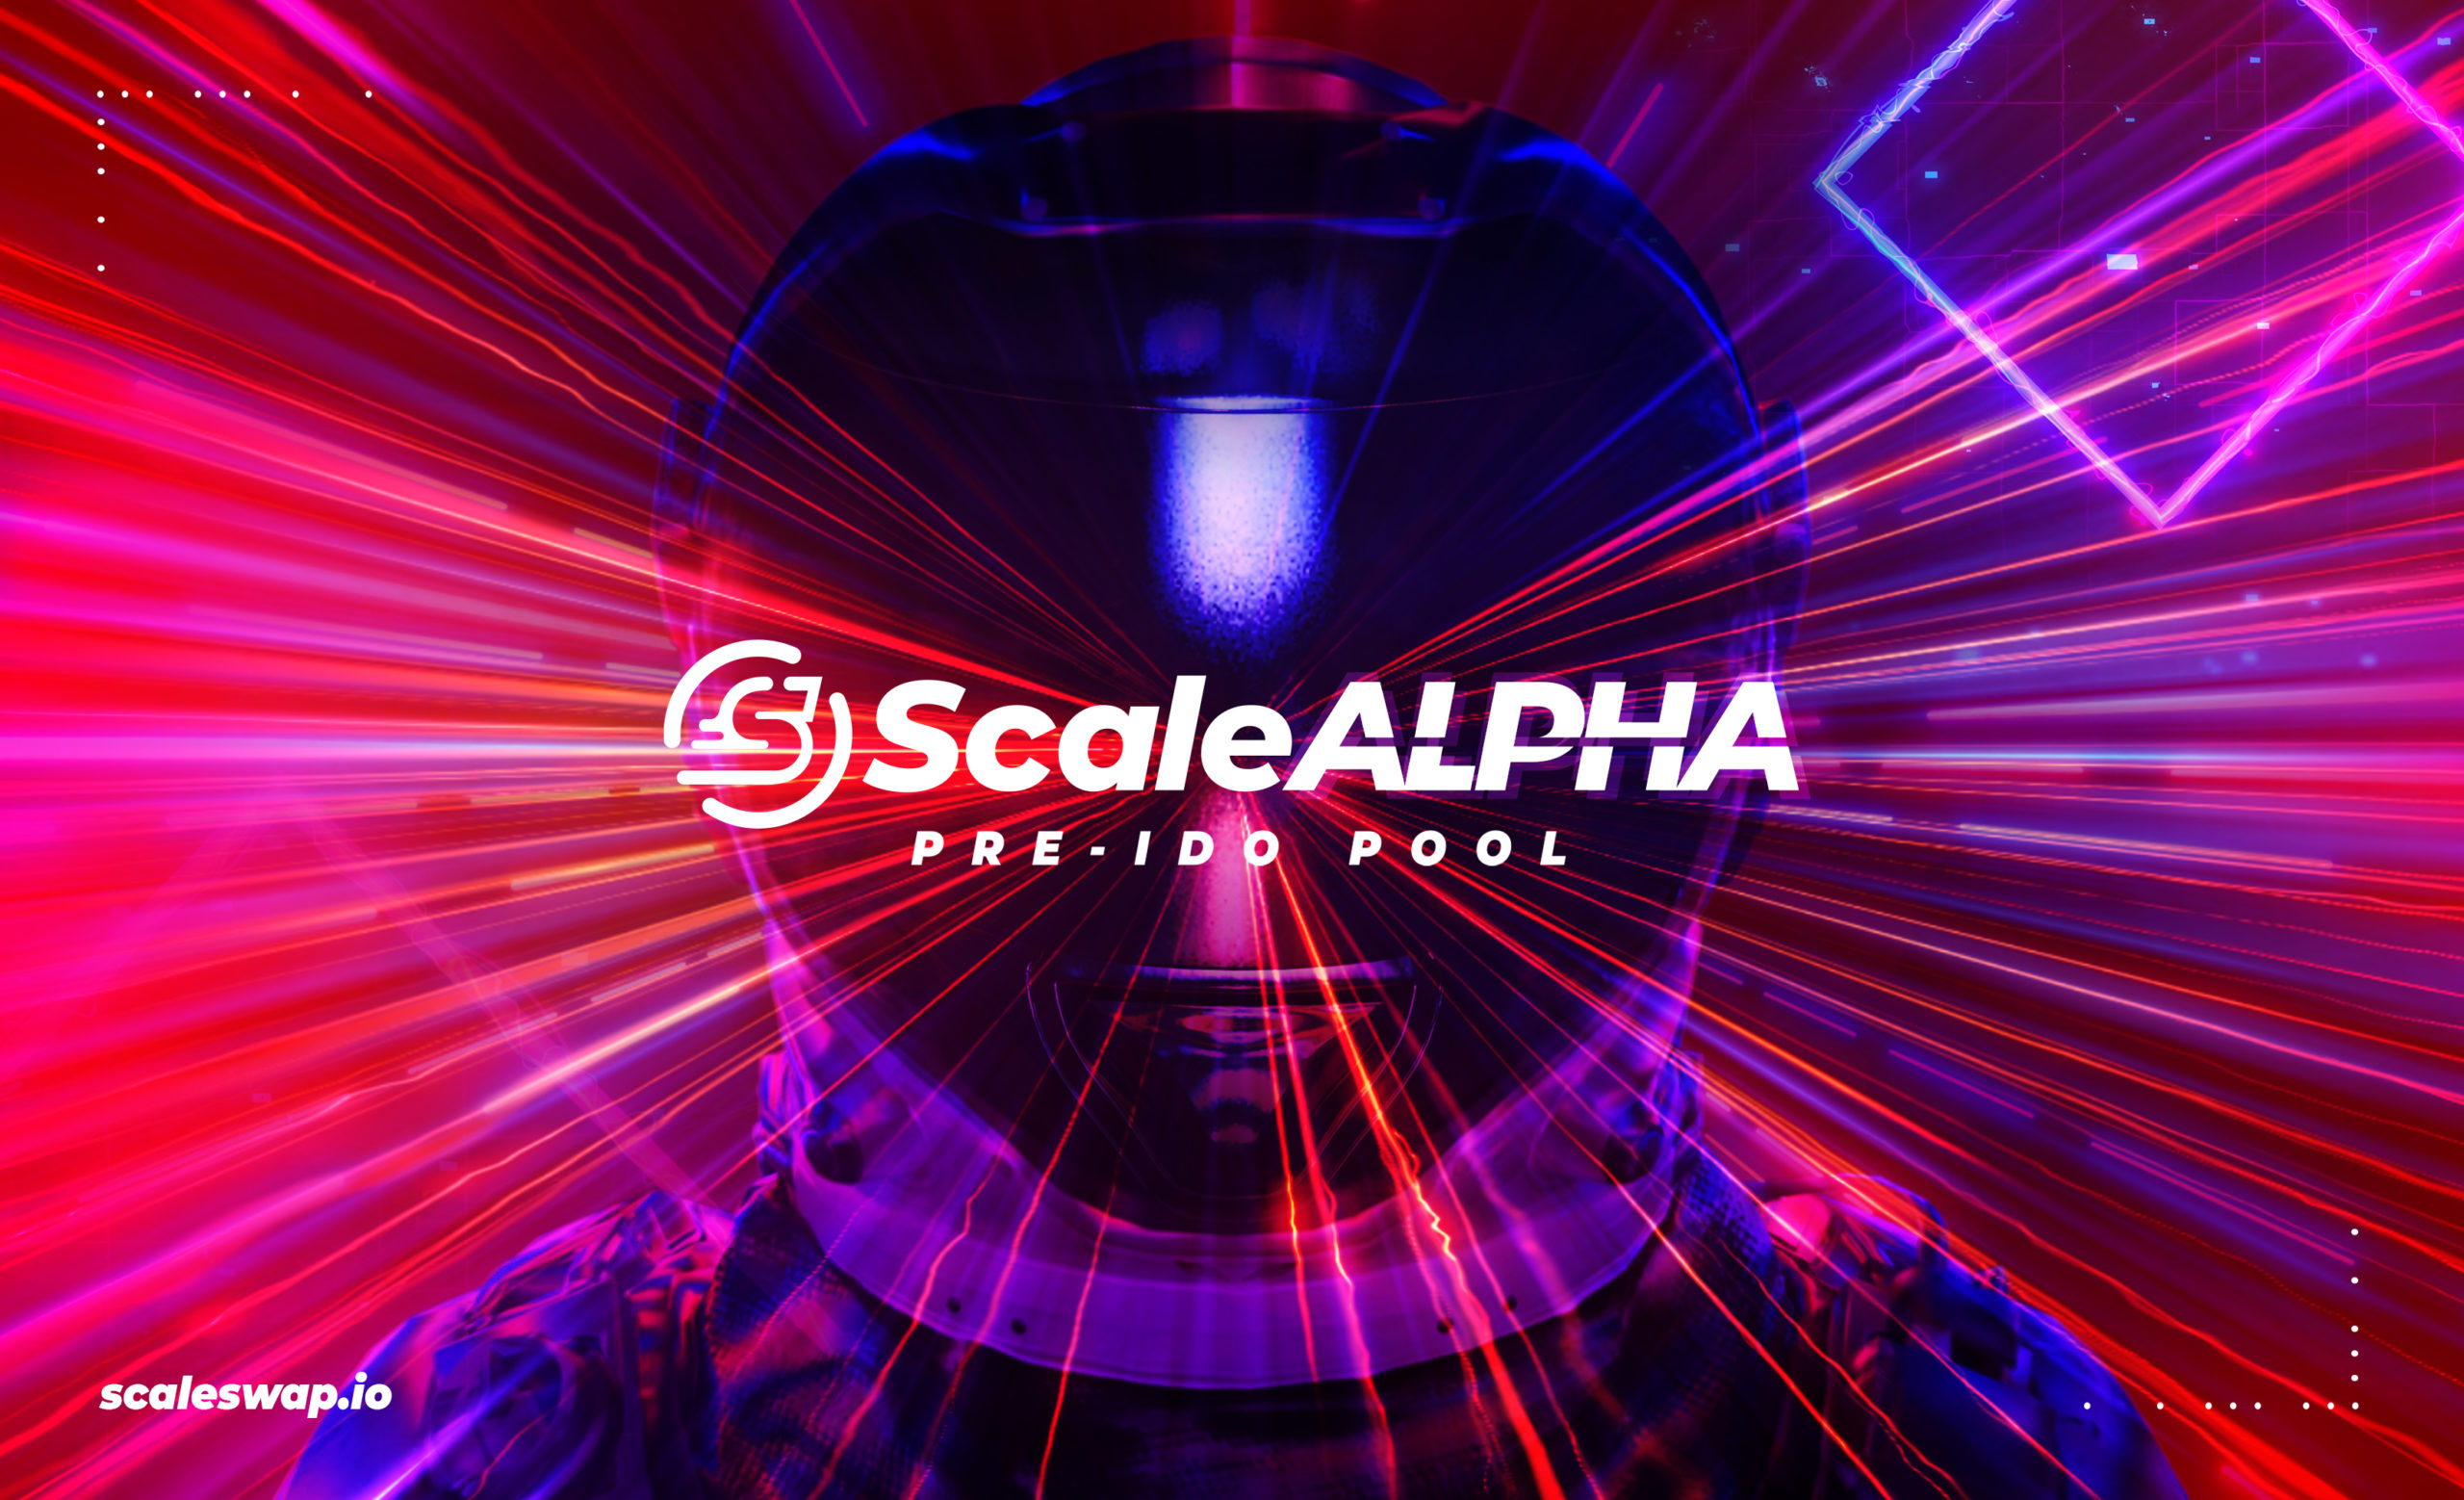 ScaleALPHA header image with lights and astronaut.